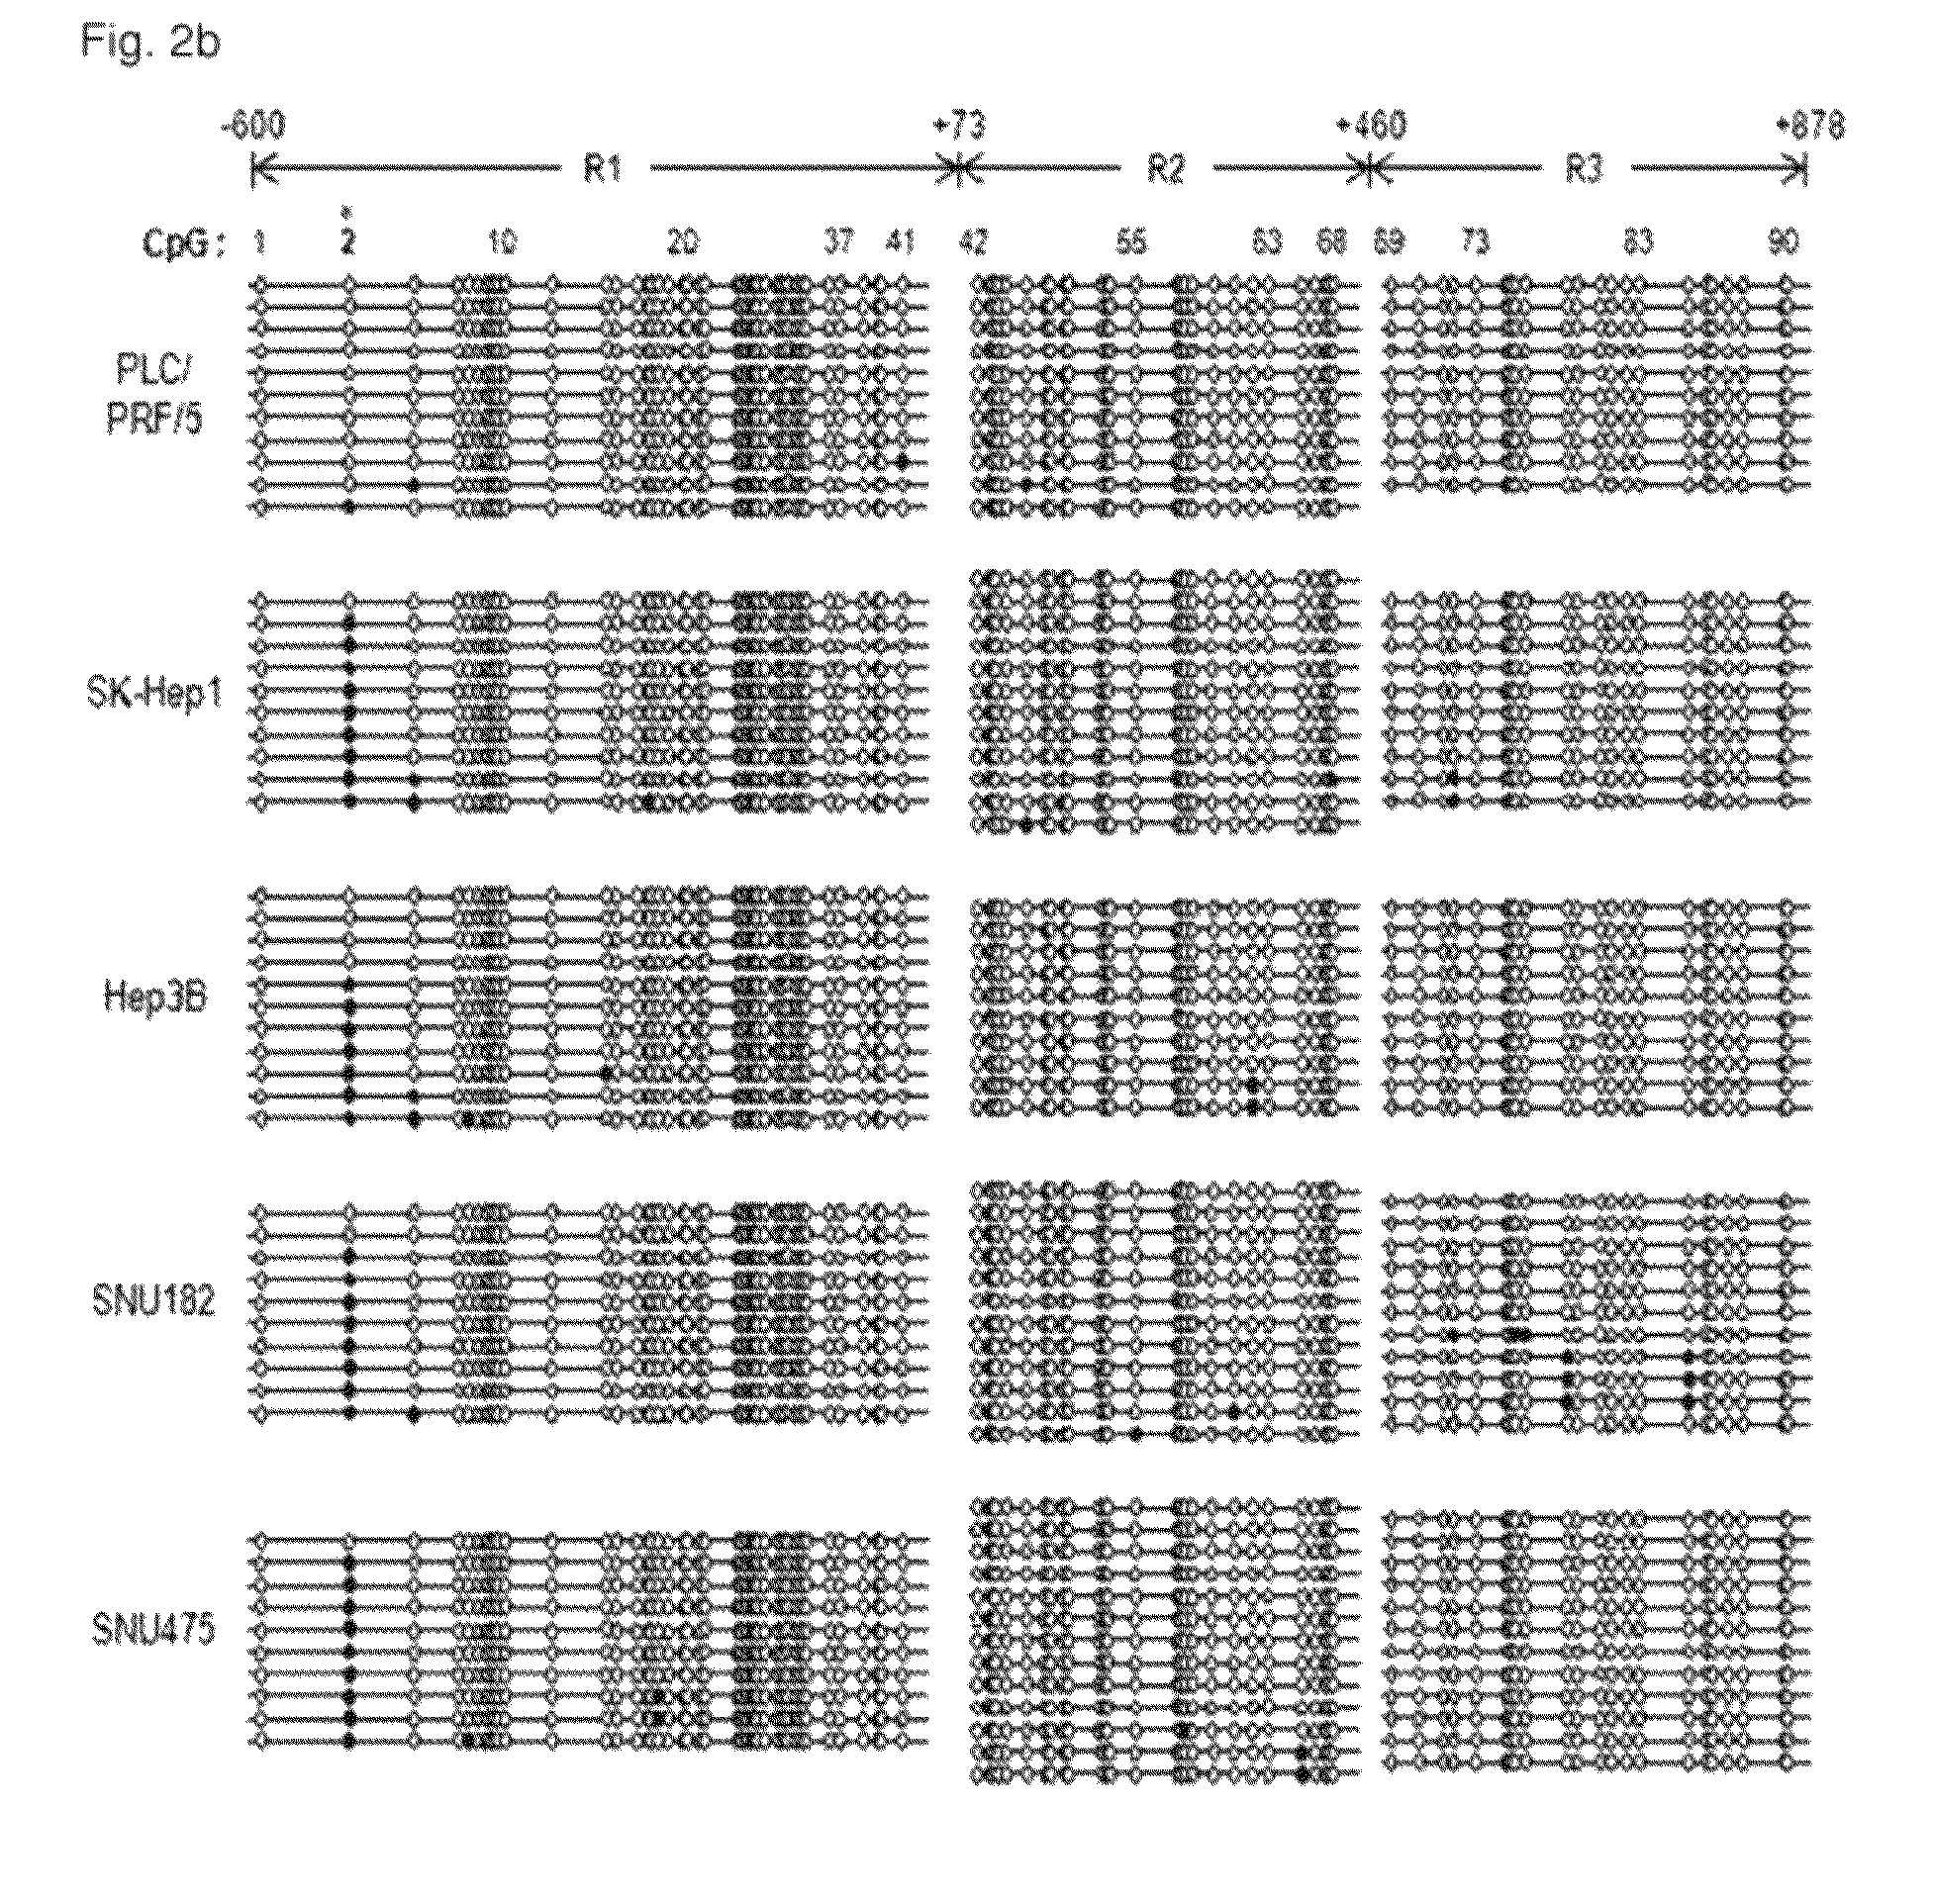 Method for diagnosis/prognosis of cancers using an epigenetic marker consisting of a specific single CpG site in TTP promoter and treatment of cancers by regulating its epigenetic status